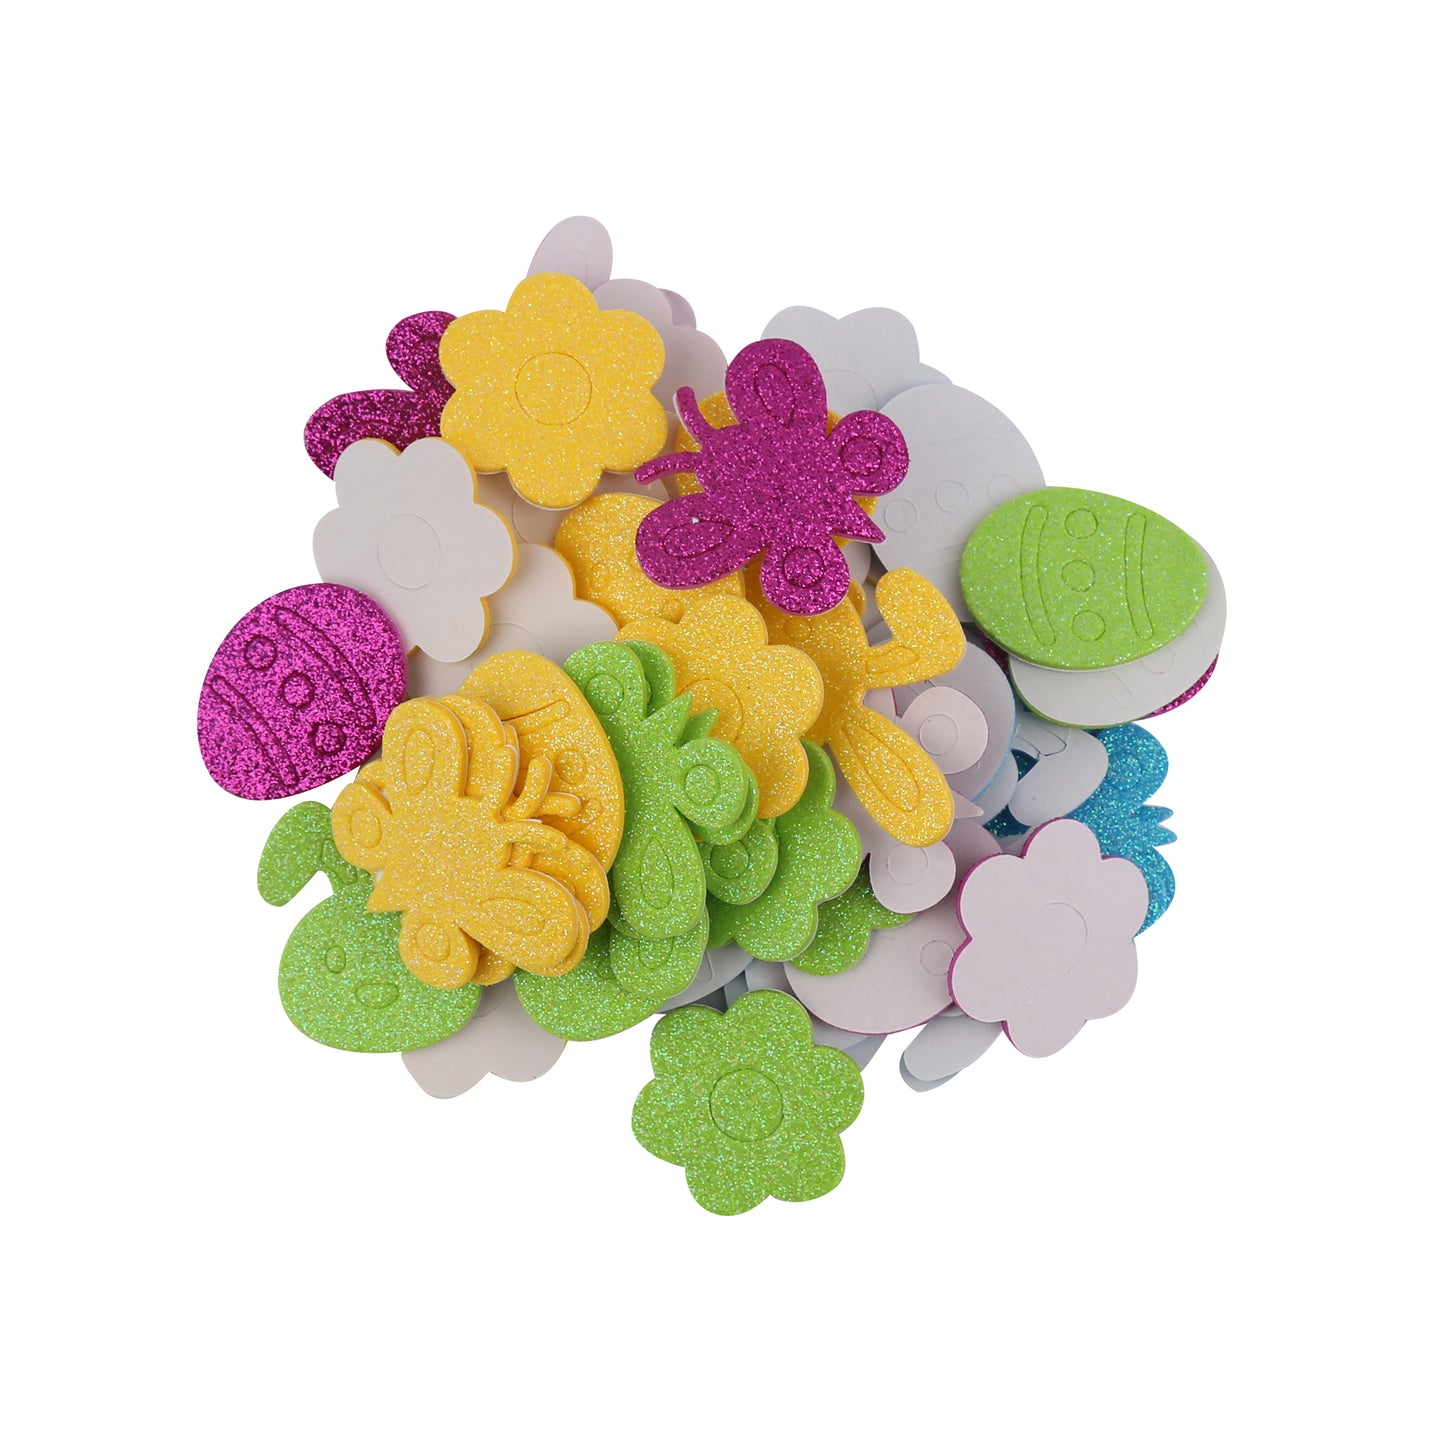 Cheep N Cheerful 159 Pieces Foam Easter Craft Set, Fun Foam Easter Craft Set - 159 Pieces of Creative Fun with Foam Stickers and Easter Egg Cutouts